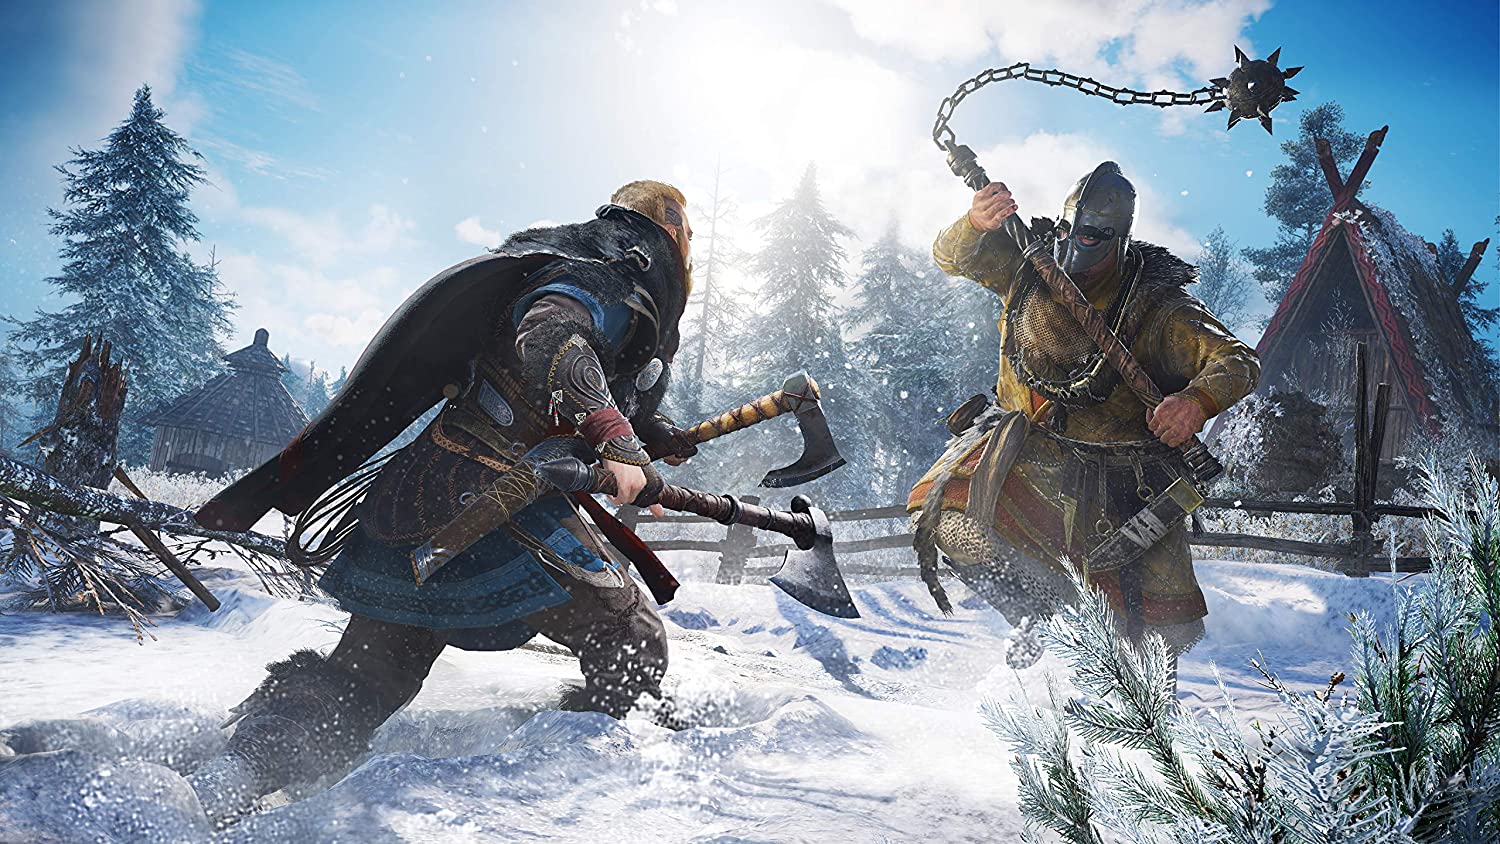 Image for We asked real vikings about female warriors, stealth and castles in Assassin's Creed Valhalla